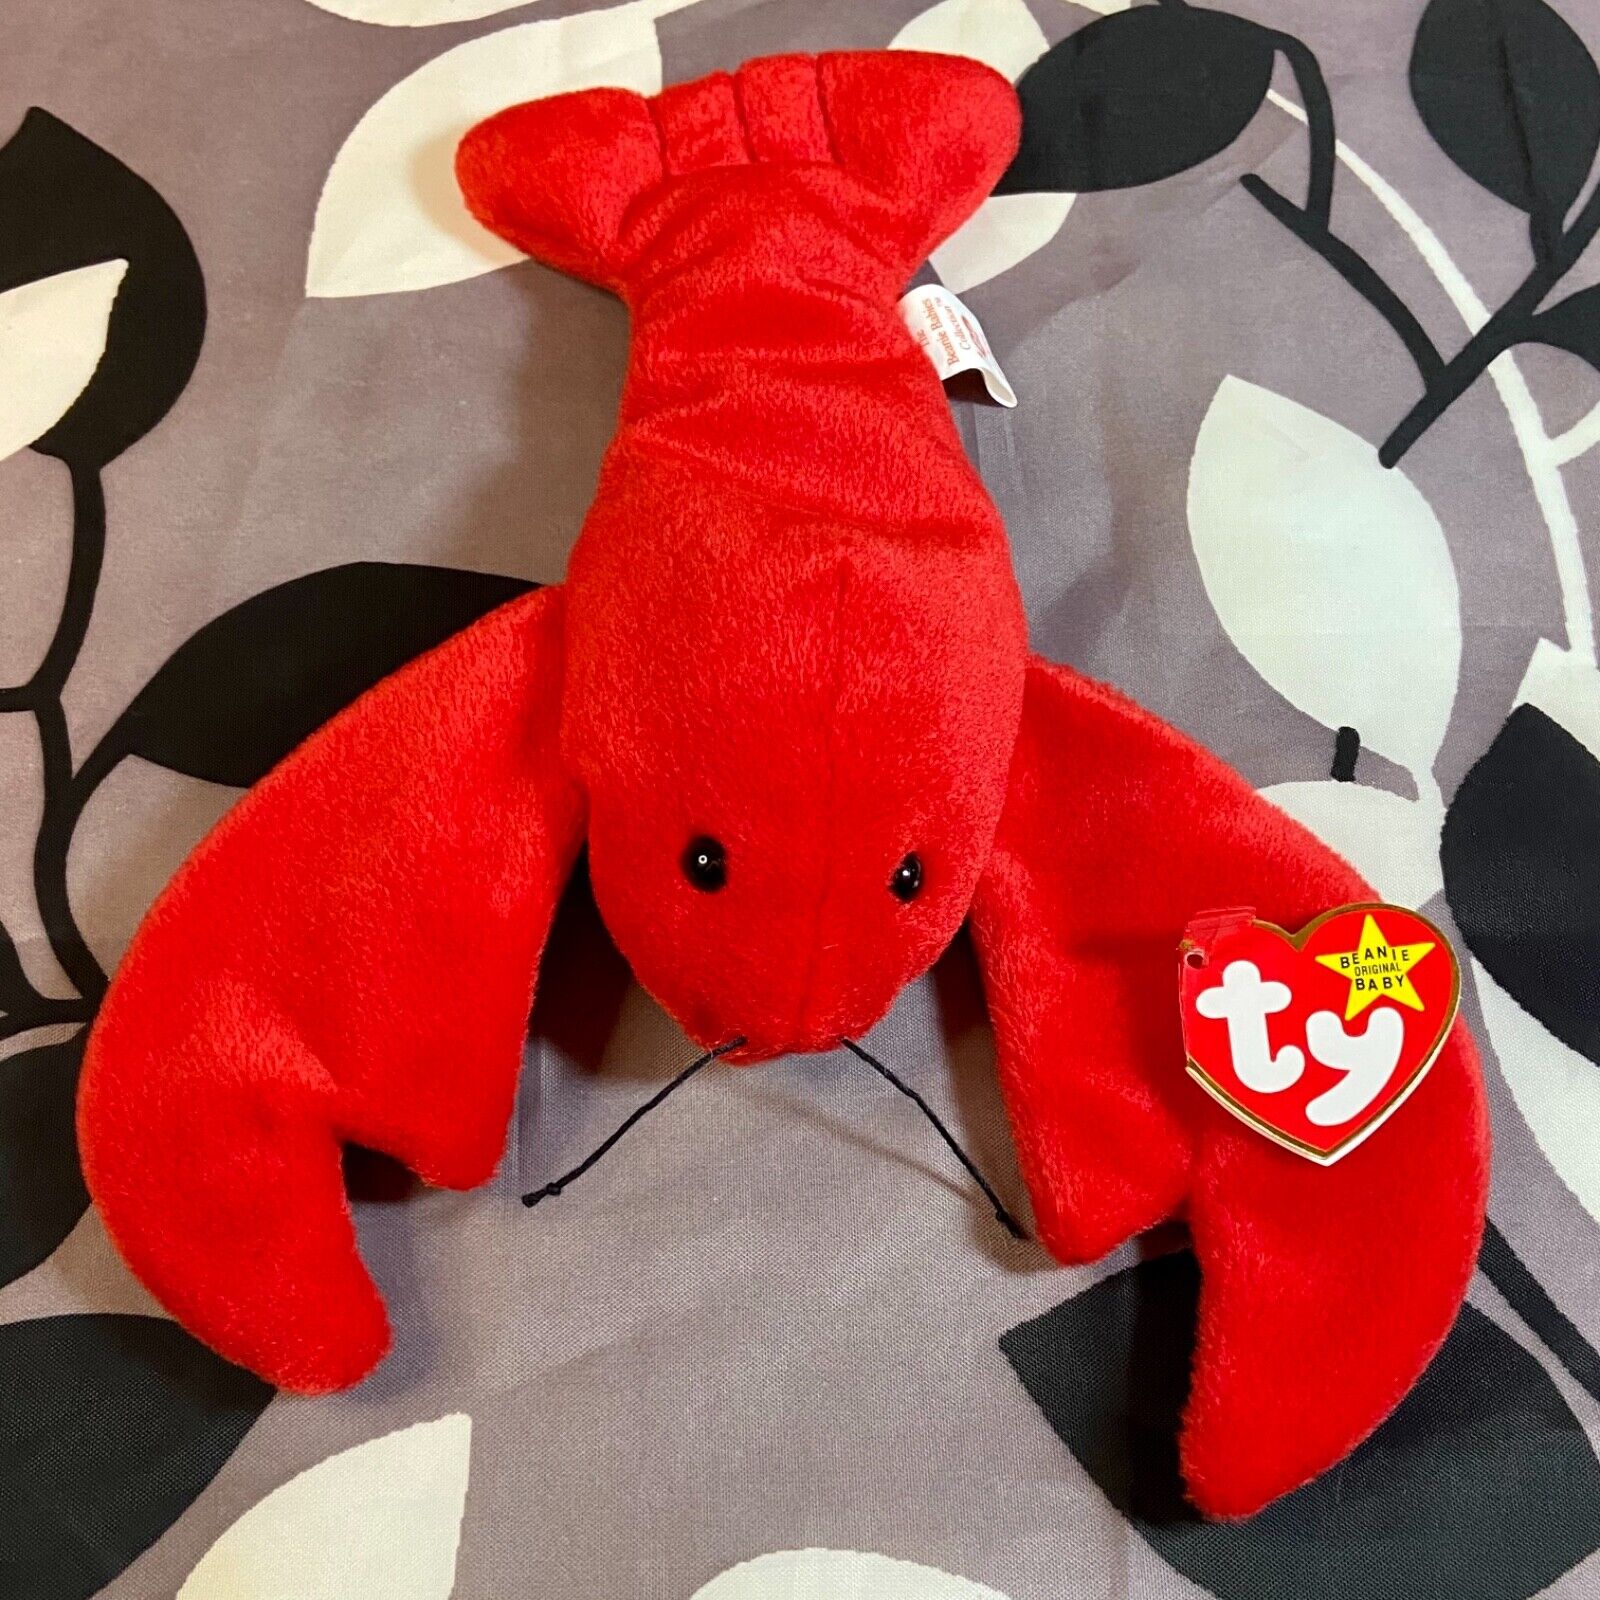 Ty Beanie Baby Original 1993 “Pinchers” The Lobster #4026 PVC Pellets Tag Errors